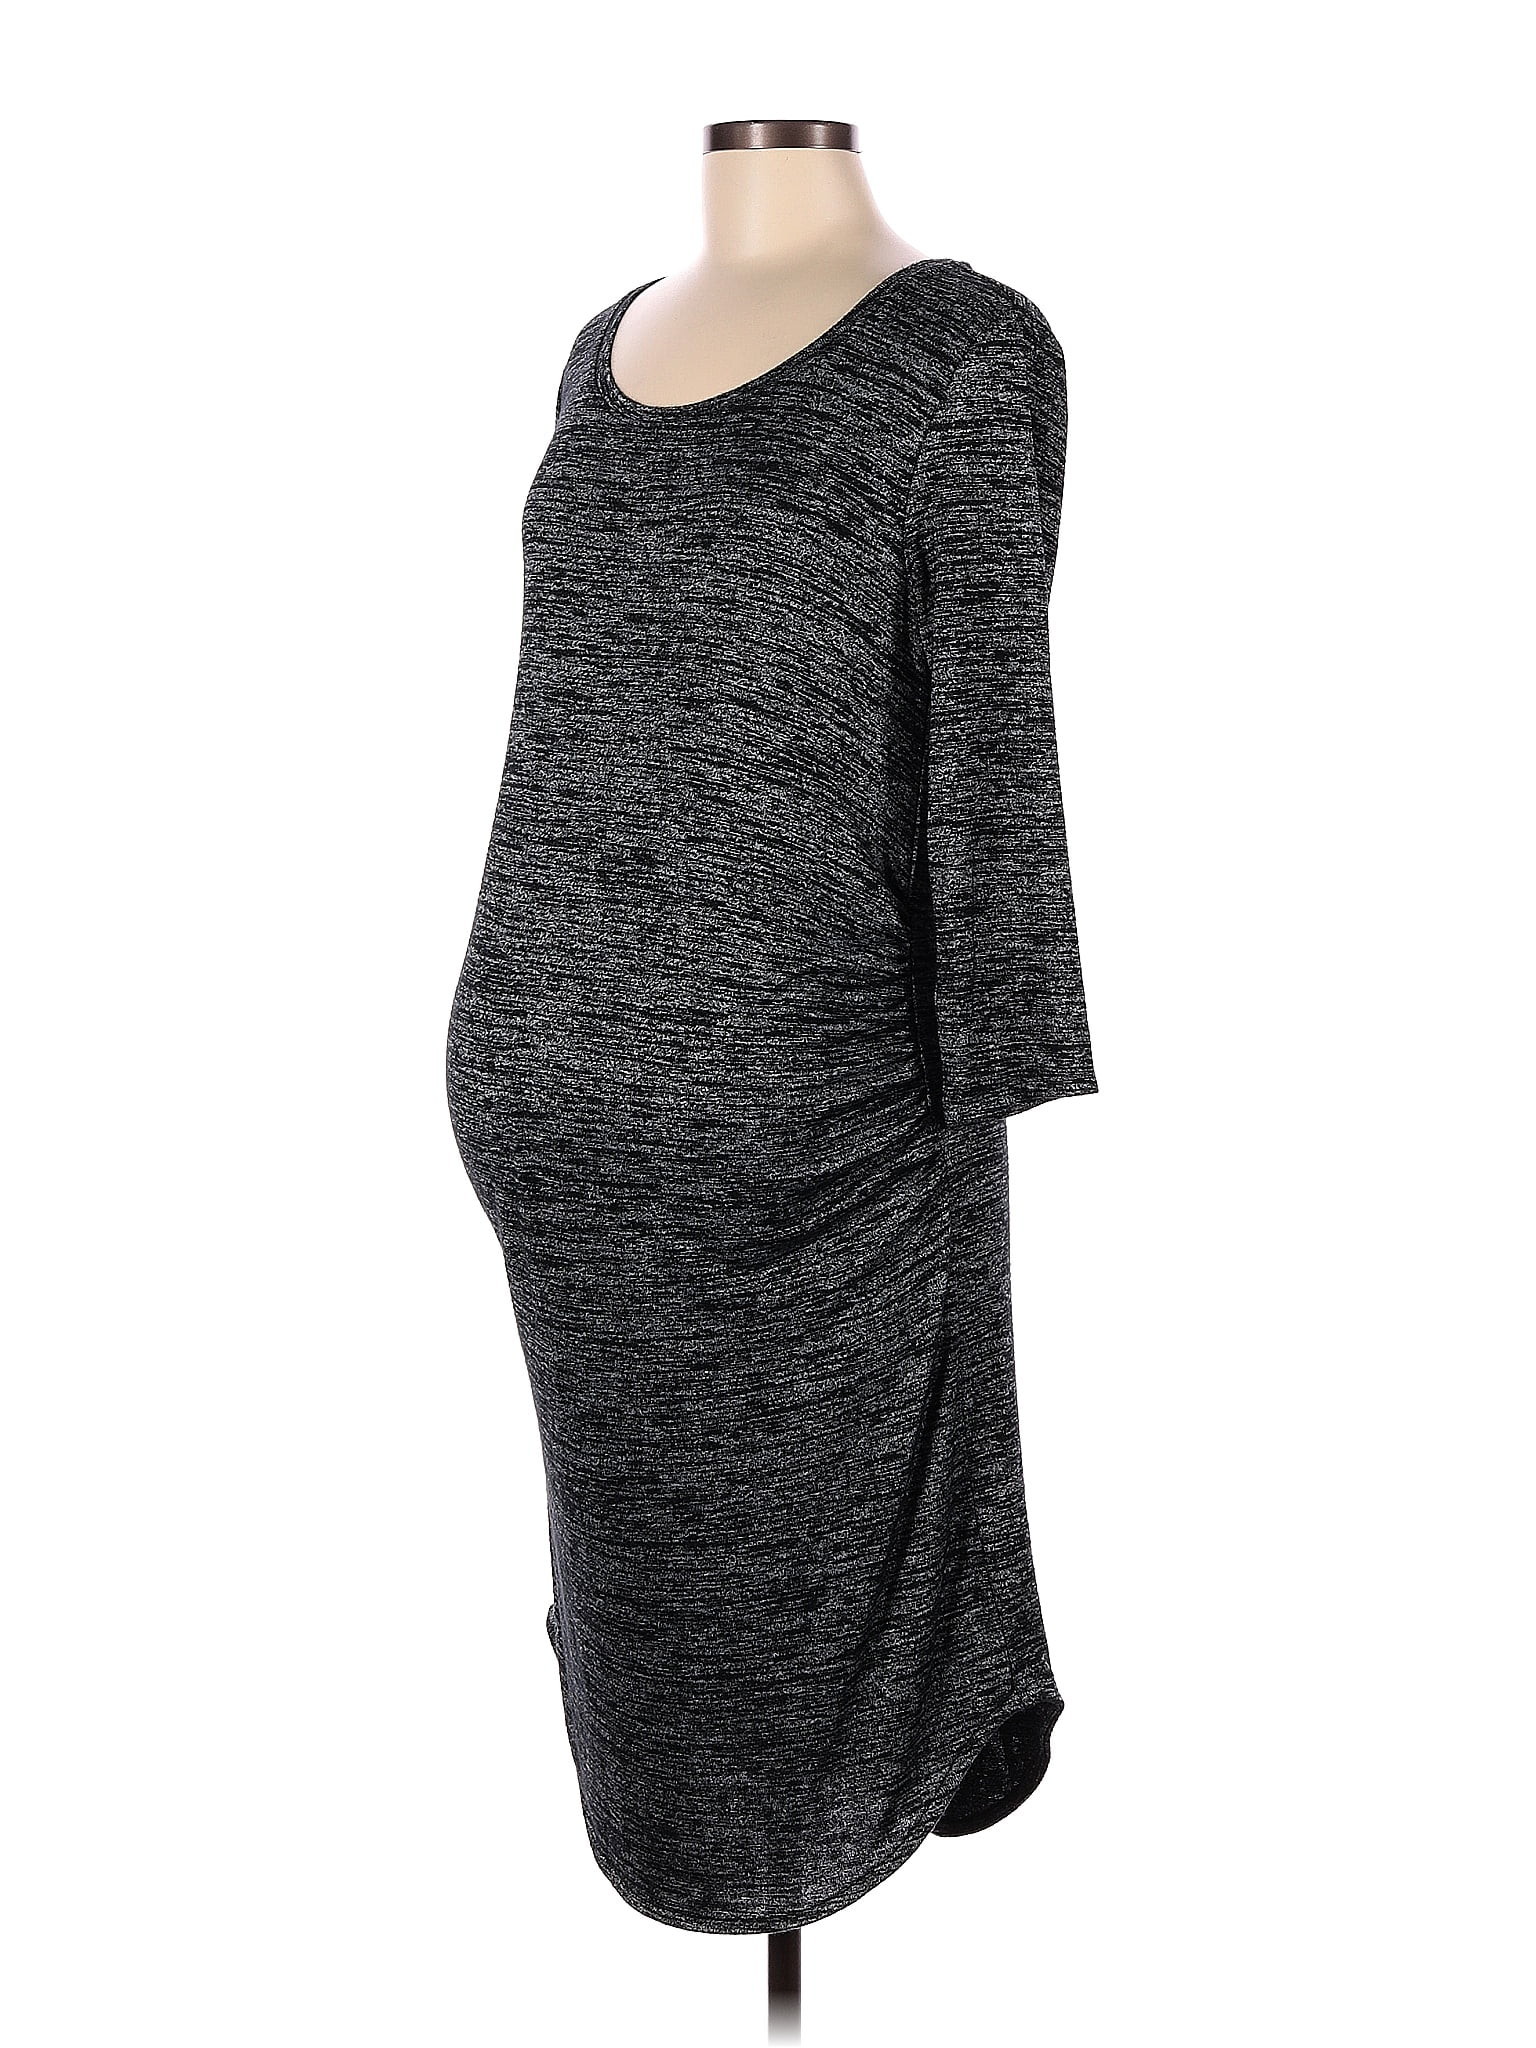 Gap - Maternity Marled Gray Casual Dress Size M (Maternity) - 64% off